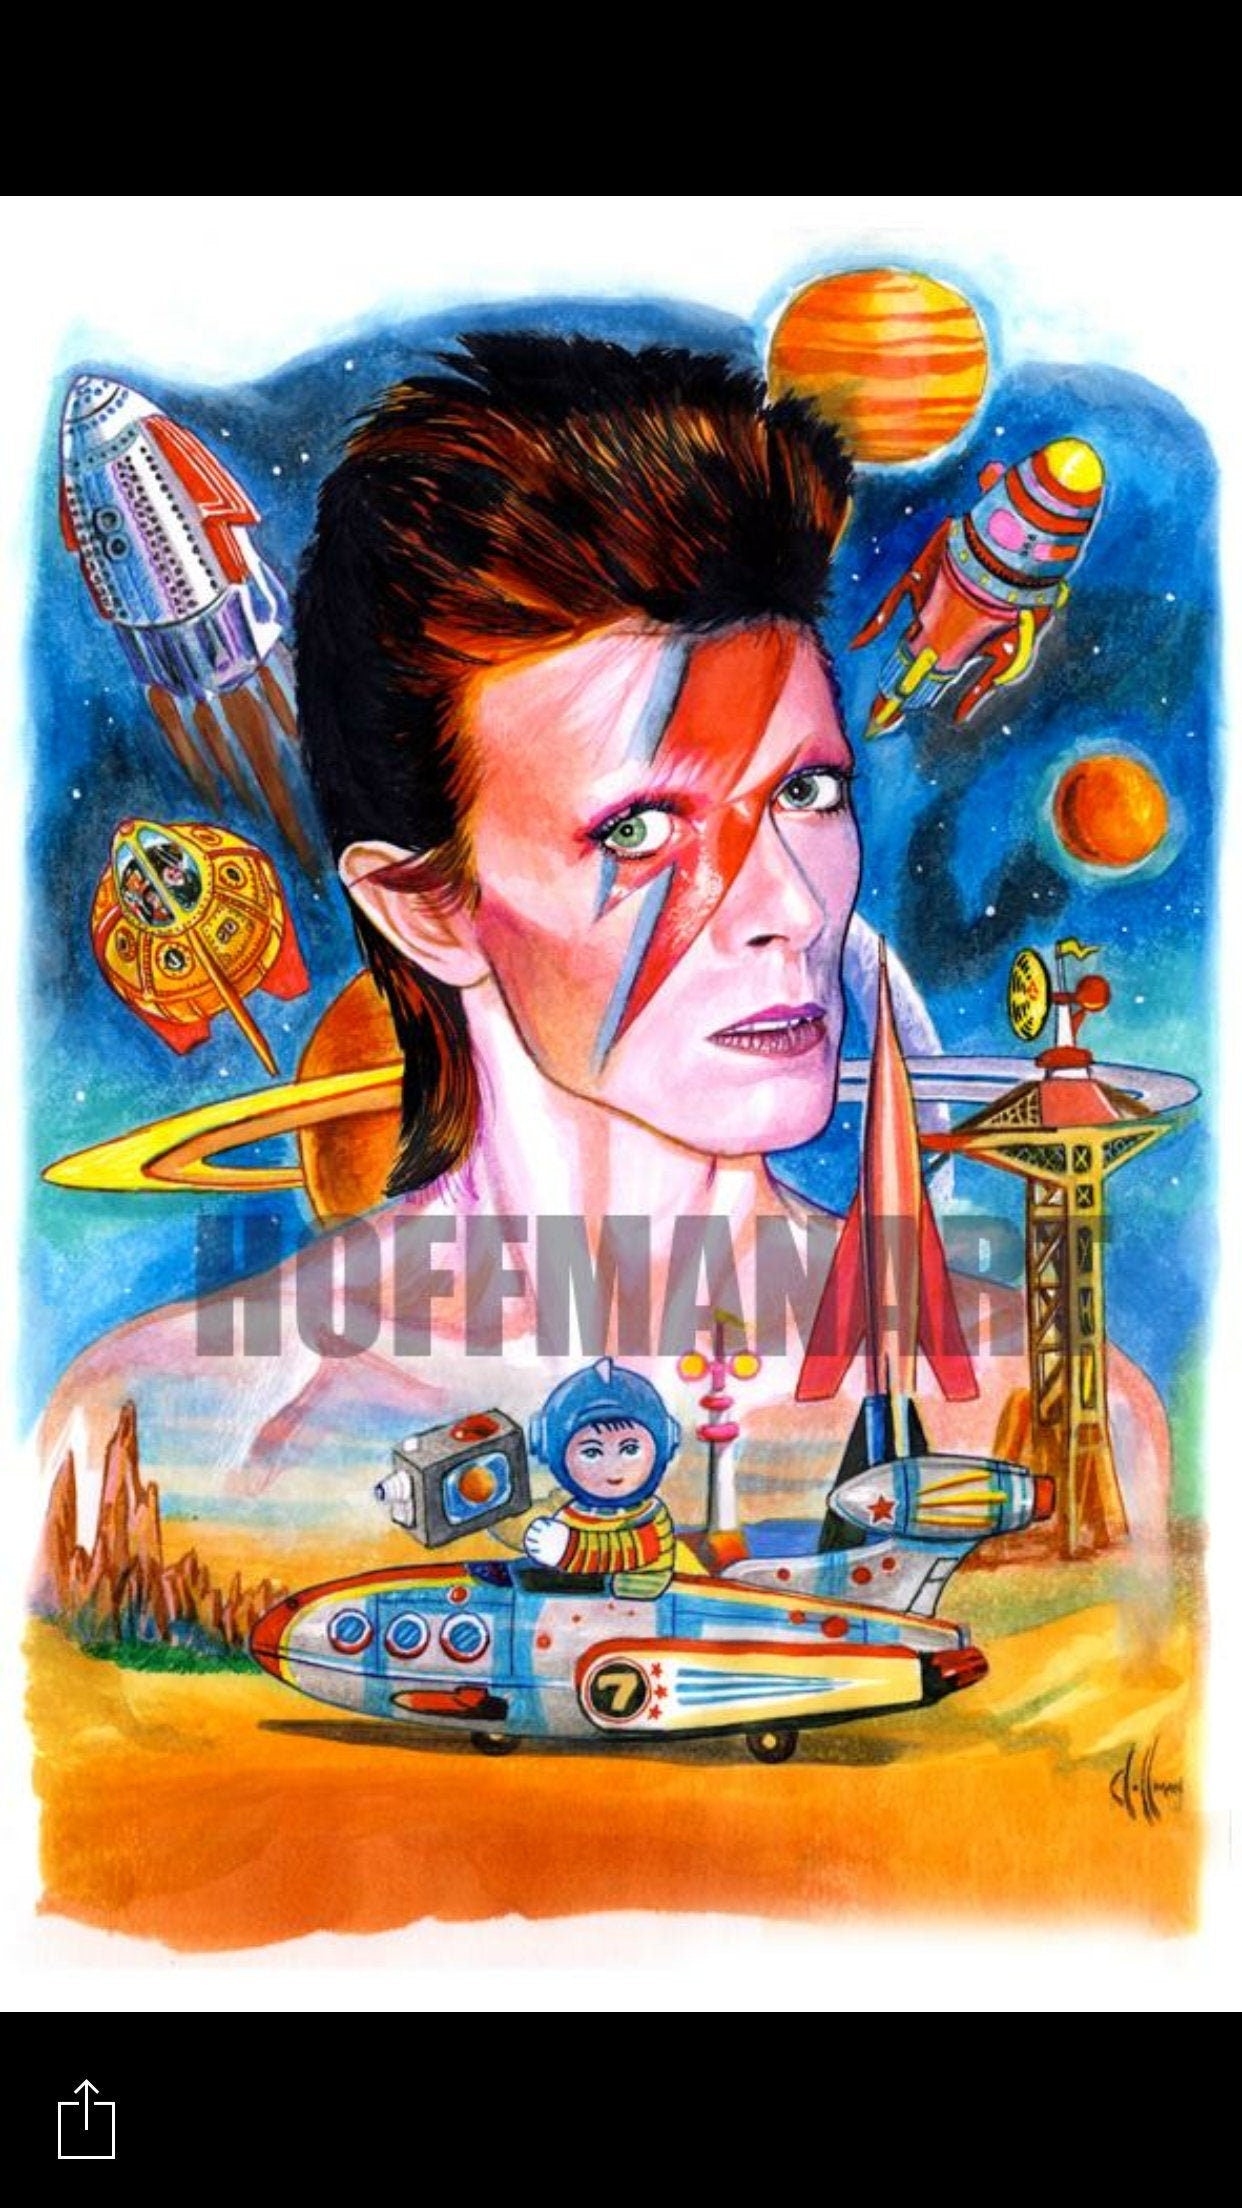 David Bowie Ground Control To Major Tom Music Artist Print From Chris Hoffman Art 6607